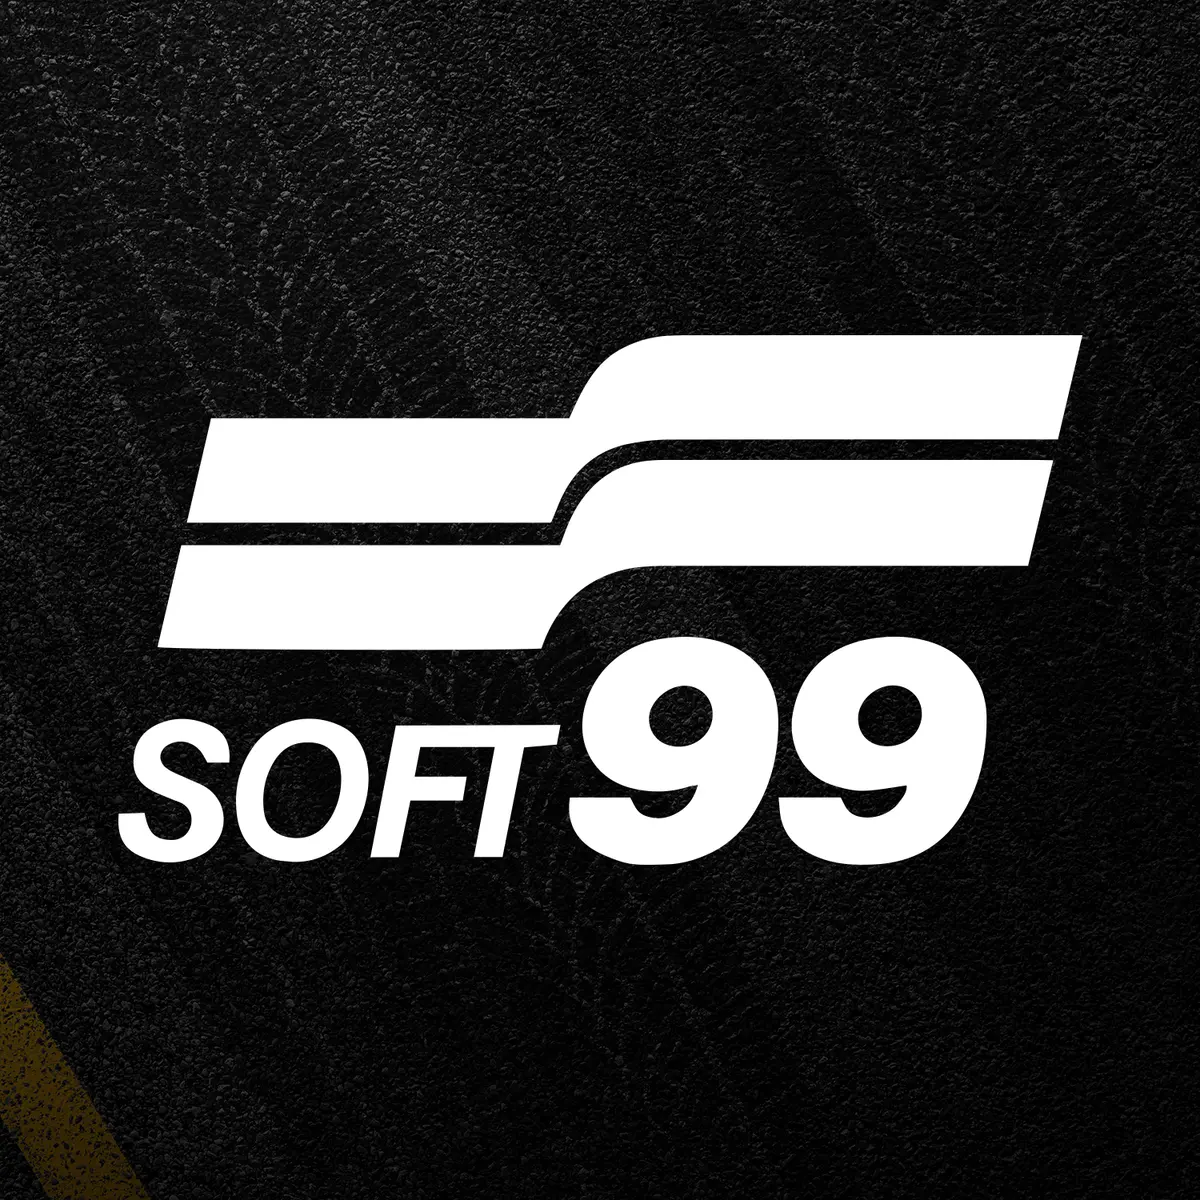 Soft99 Logo Sticker Car Detailing JDM Decal Drift Japan Cleaning Glaco Fusso